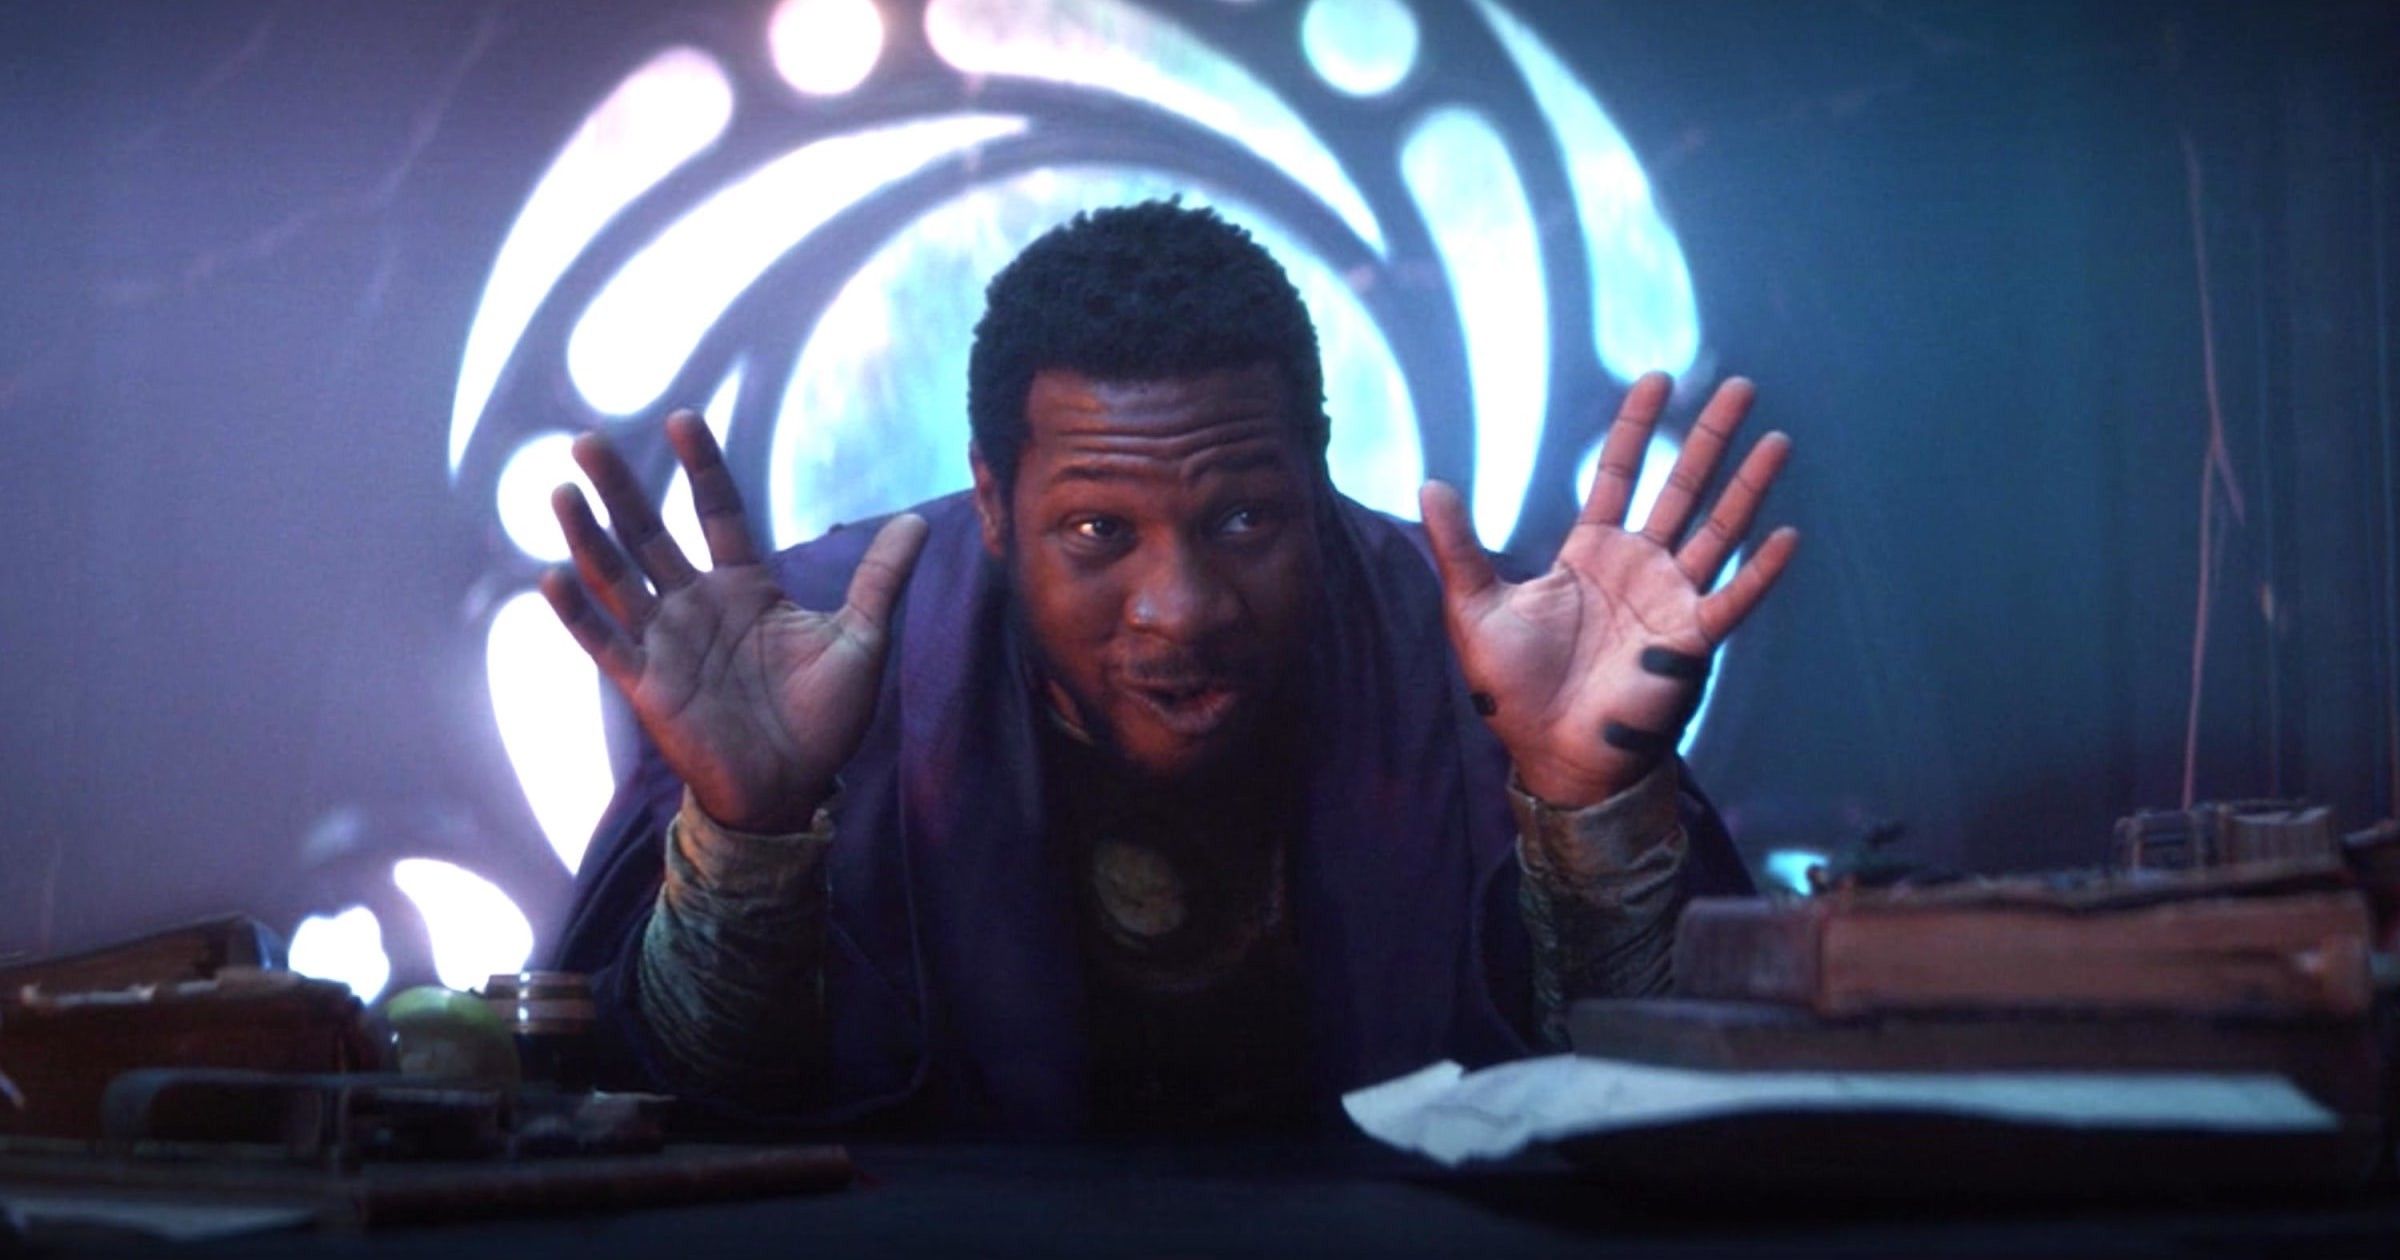 Jonathan Majors on embracing "pure clown" in acting and filmmaking